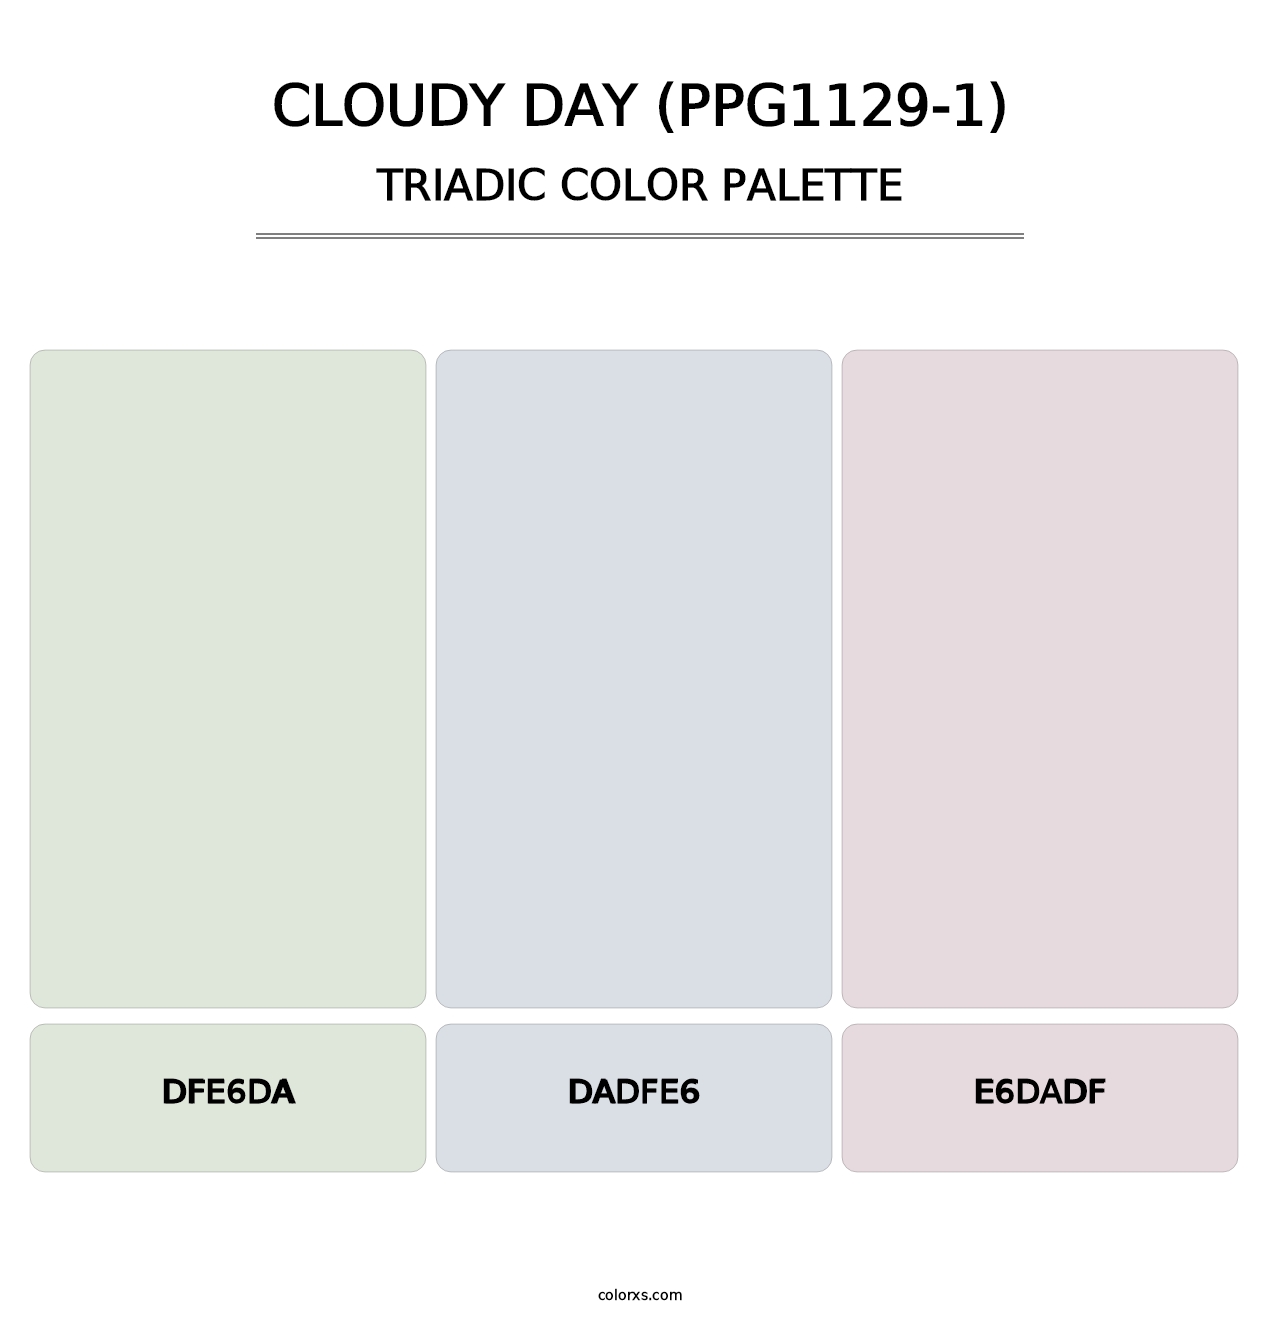 Cloudy Day (PPG1129-1) - Triadic Color Palette